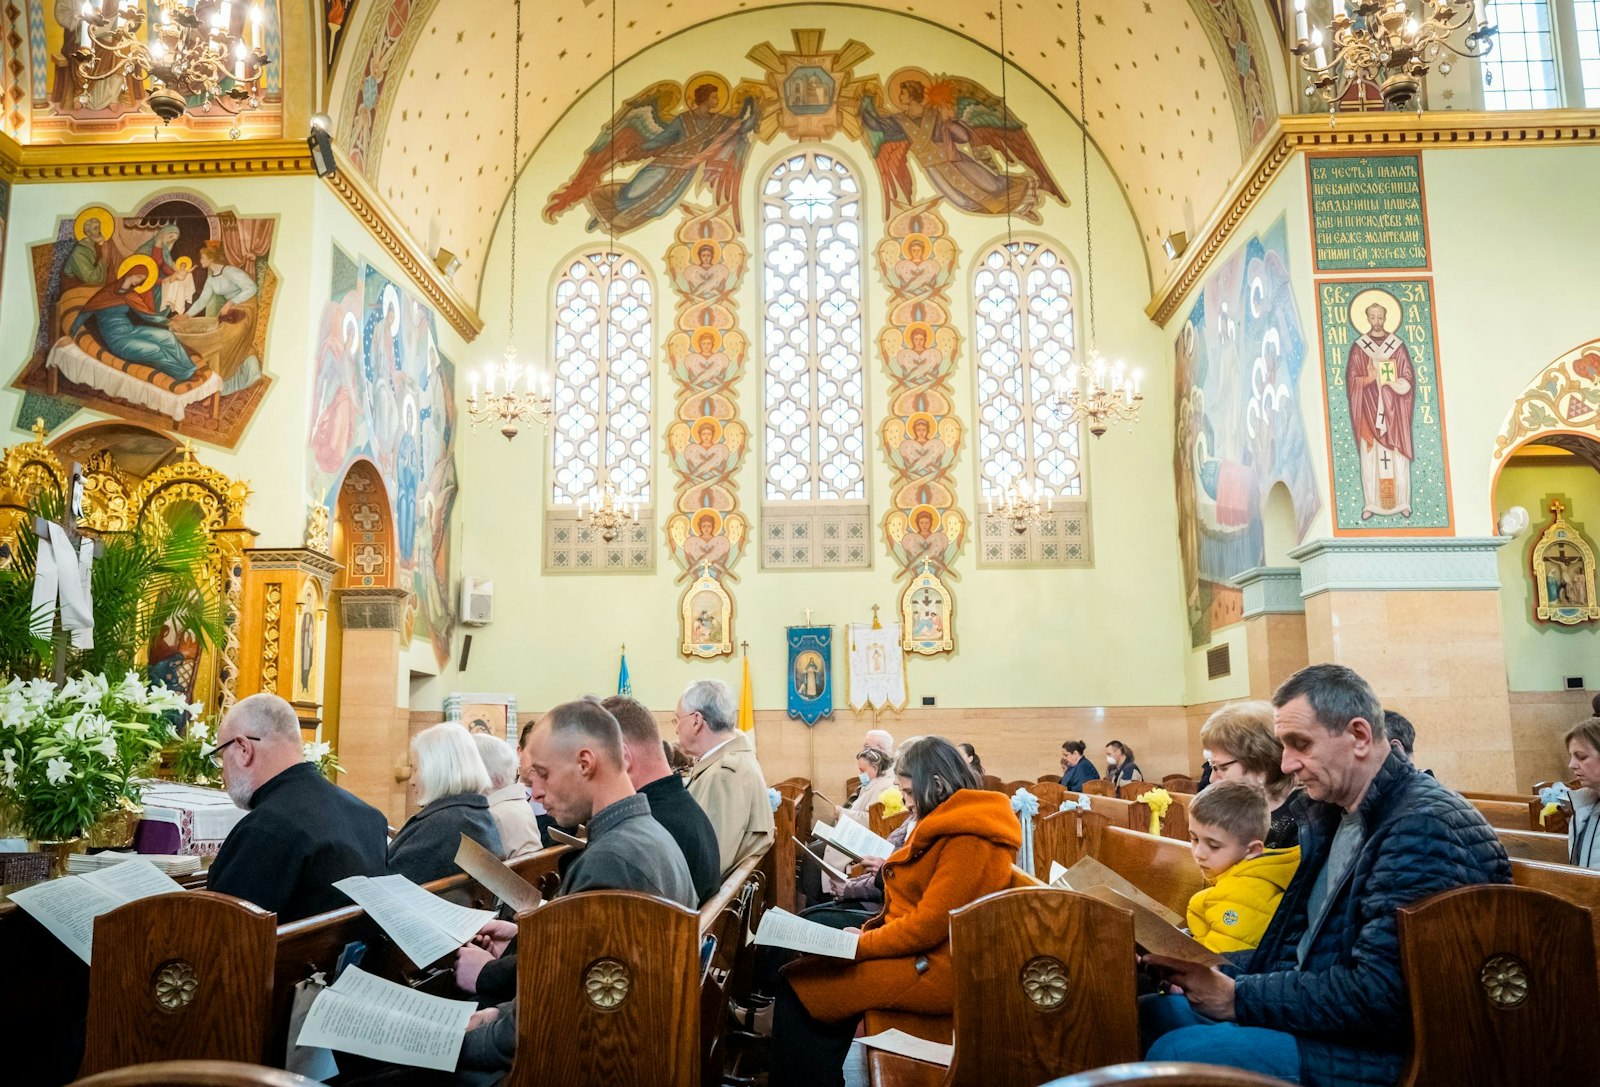 The Immaculate Conception Ukrainian Catholic community has had a particularly somber Lent and Holy Week with the ongoing war in their ancestral homeland. But Good Friday shows how death does not have the final say, God does, Father-Deacon Czornij said.